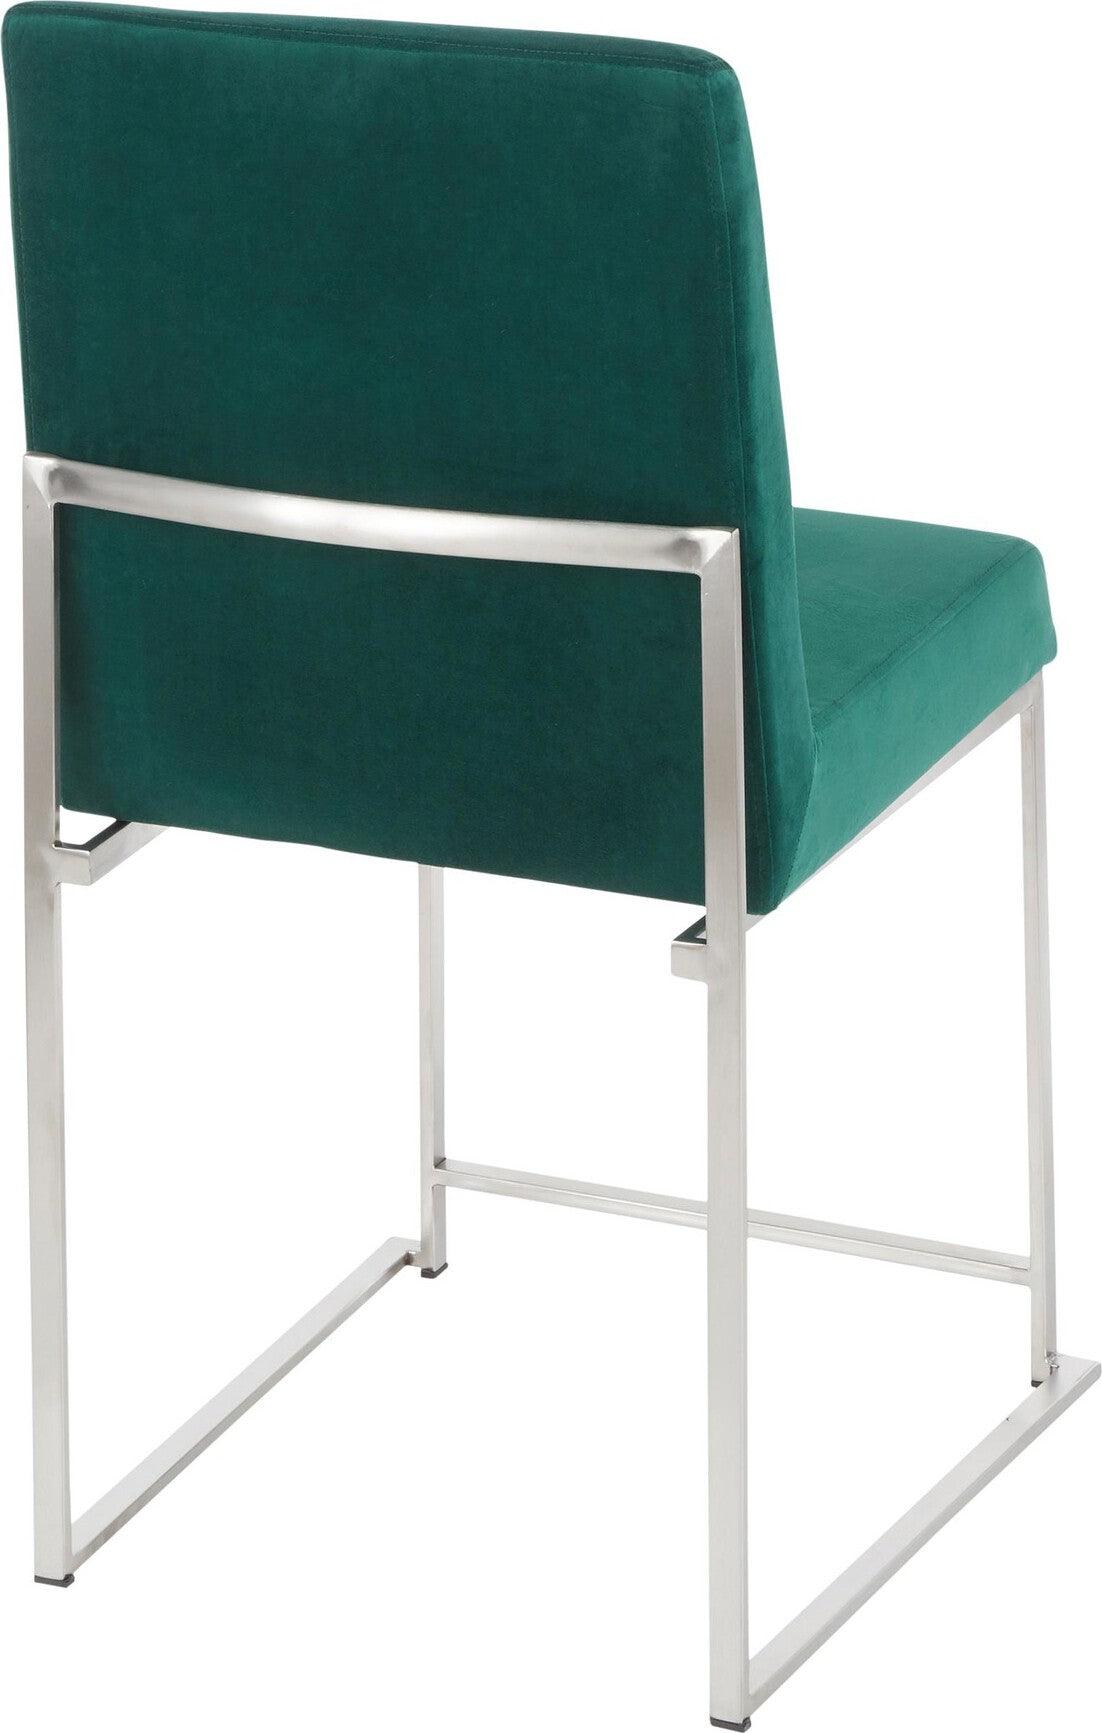 Lumisource Dining Chairs - High Back Fuji Contemporary Dining Chair in Stainless Steel and Green Velvet (Set of 2)